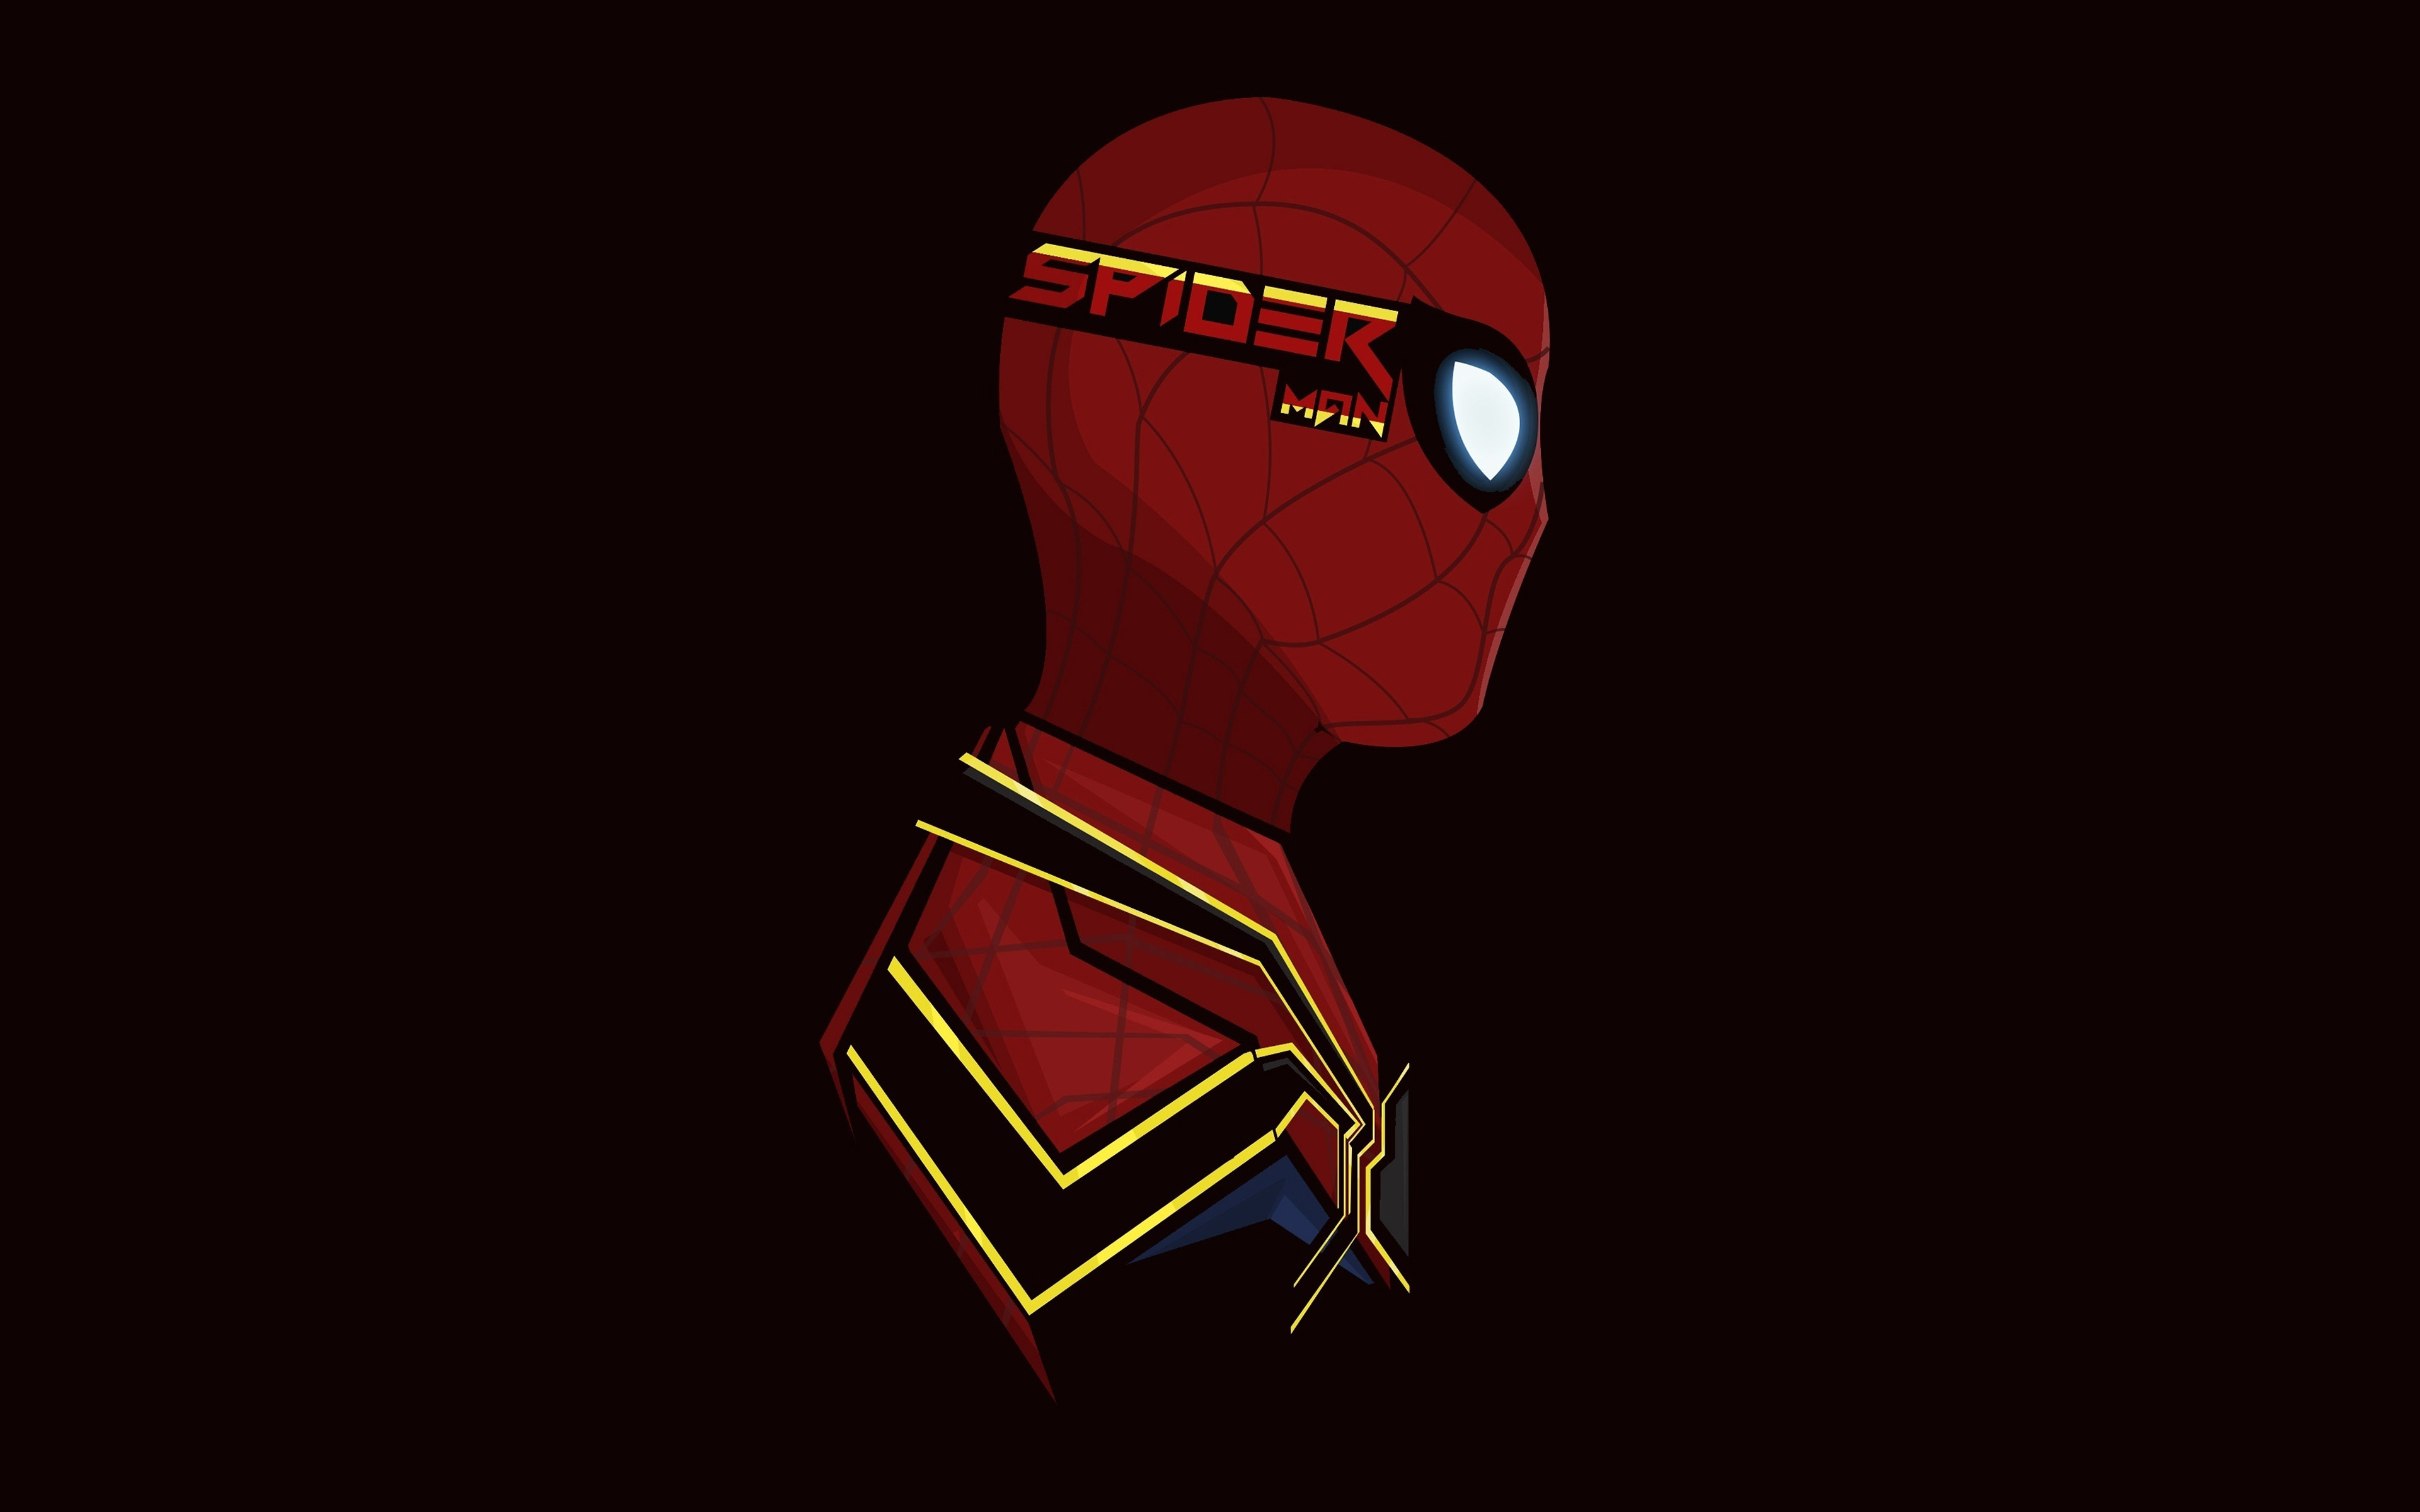 Spiderman Minimal Artwork Wallpaper, HD Minimalist 4K Wallpapers, Images,  Photos and Background - Wallpapers Den